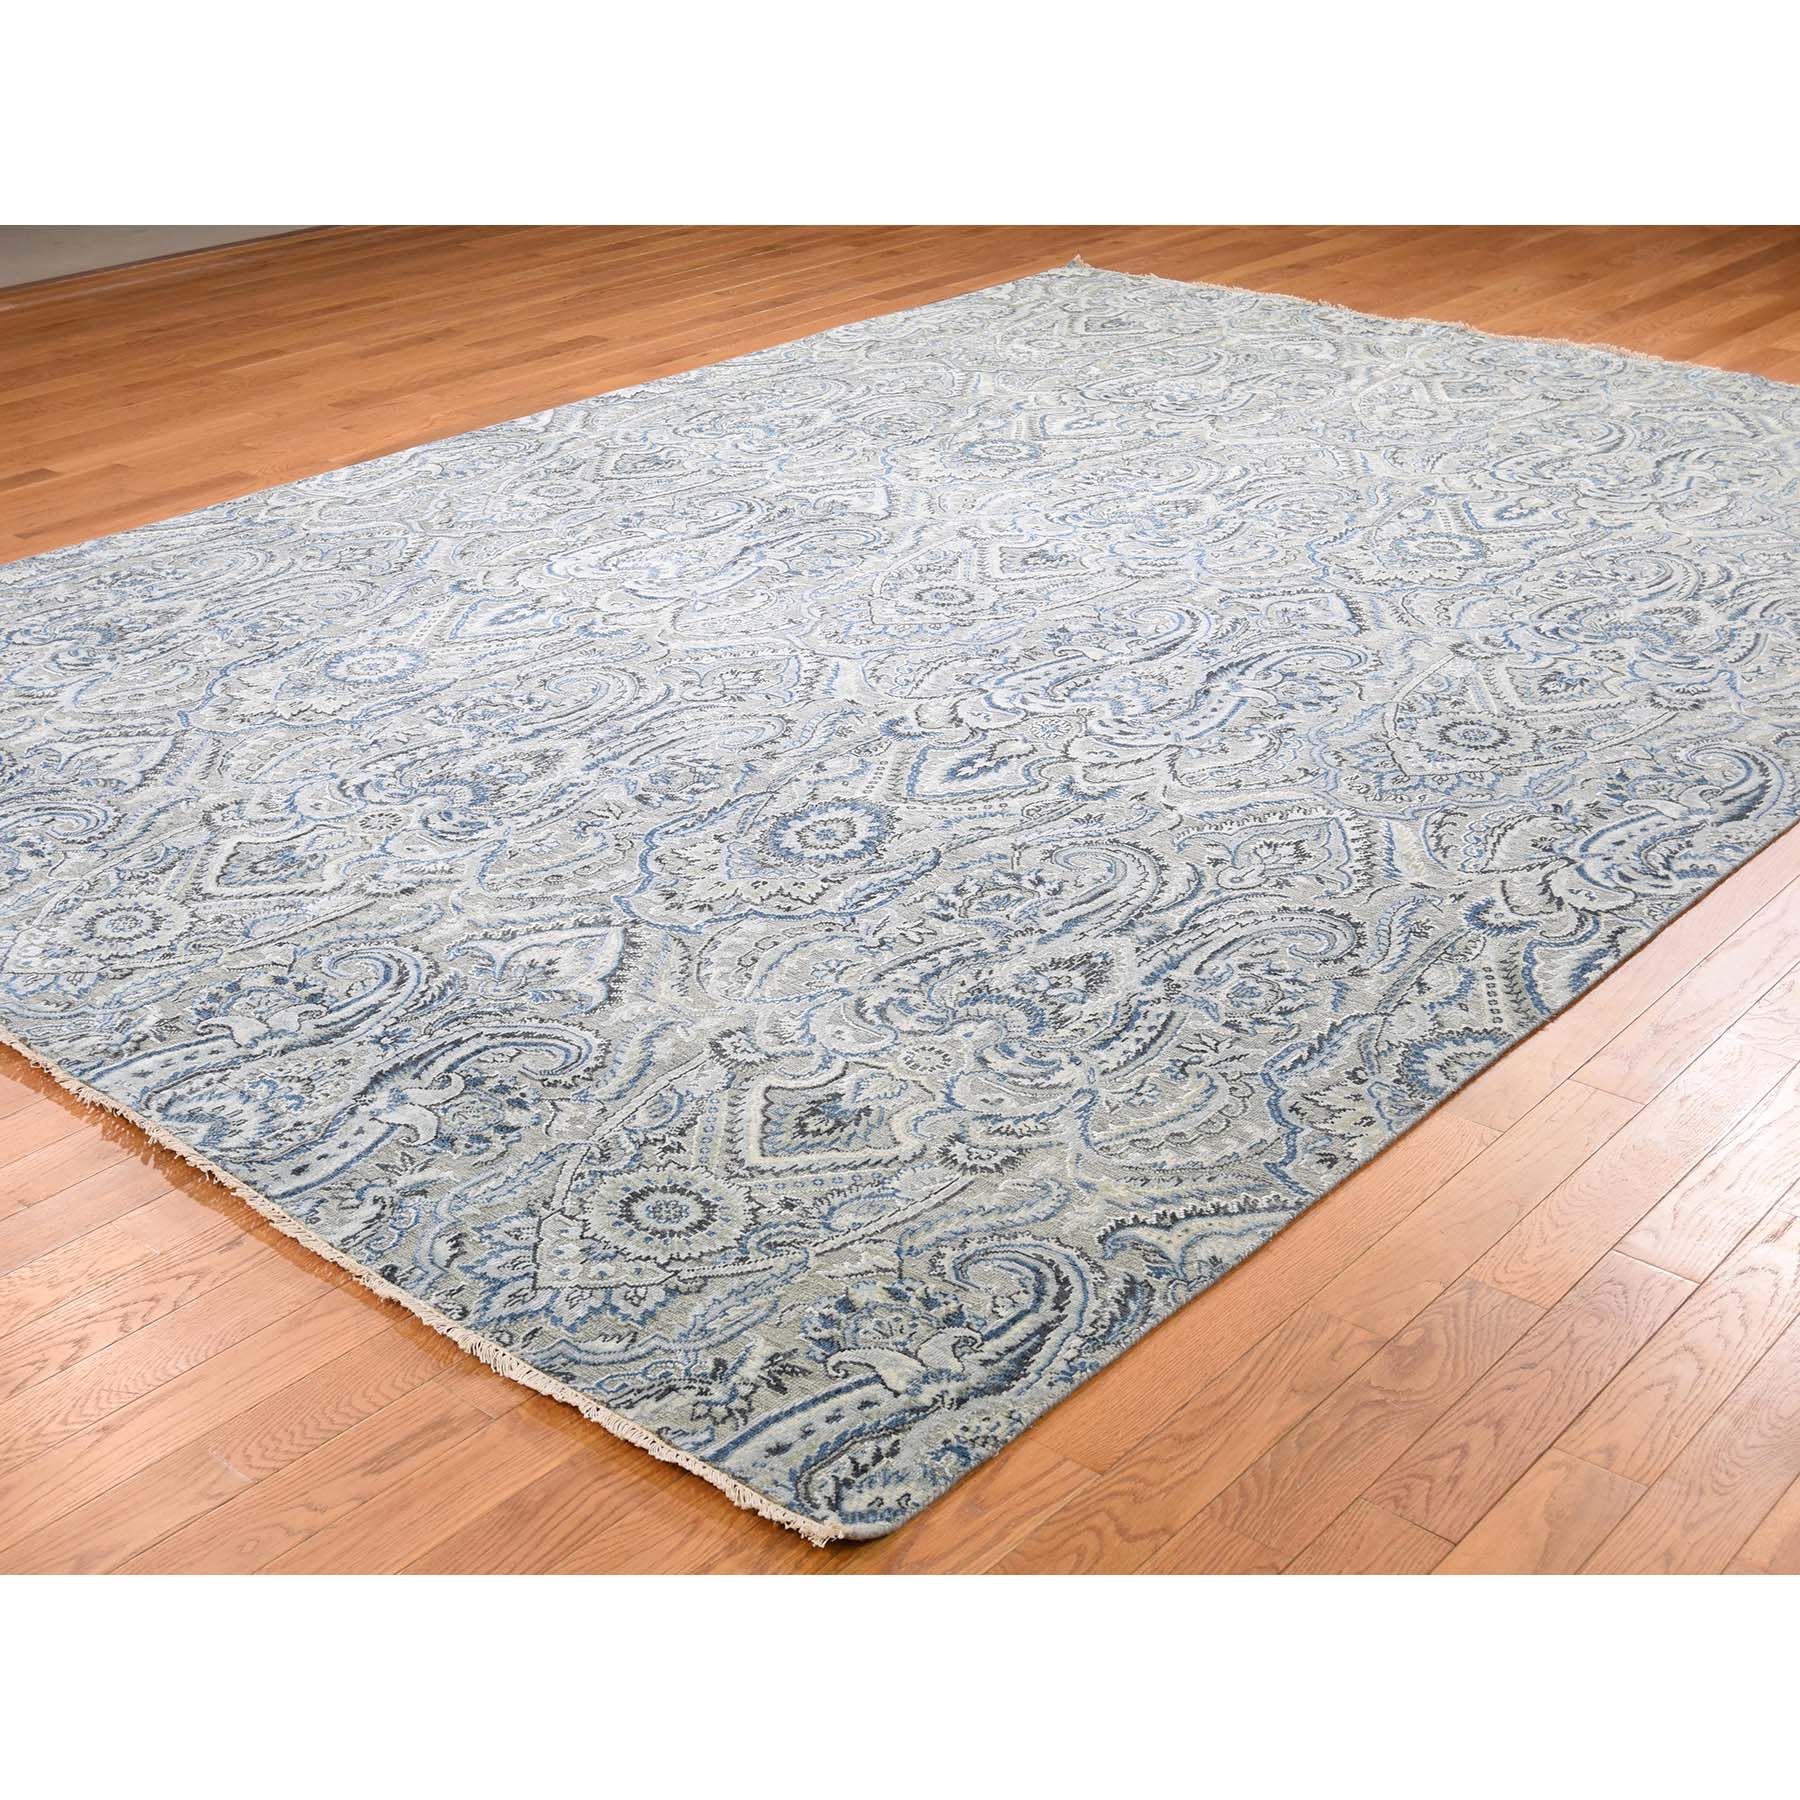 9-x12-1  Pure Silk Textured Wool Paisley Flower Design Hand-Knotted Rug 